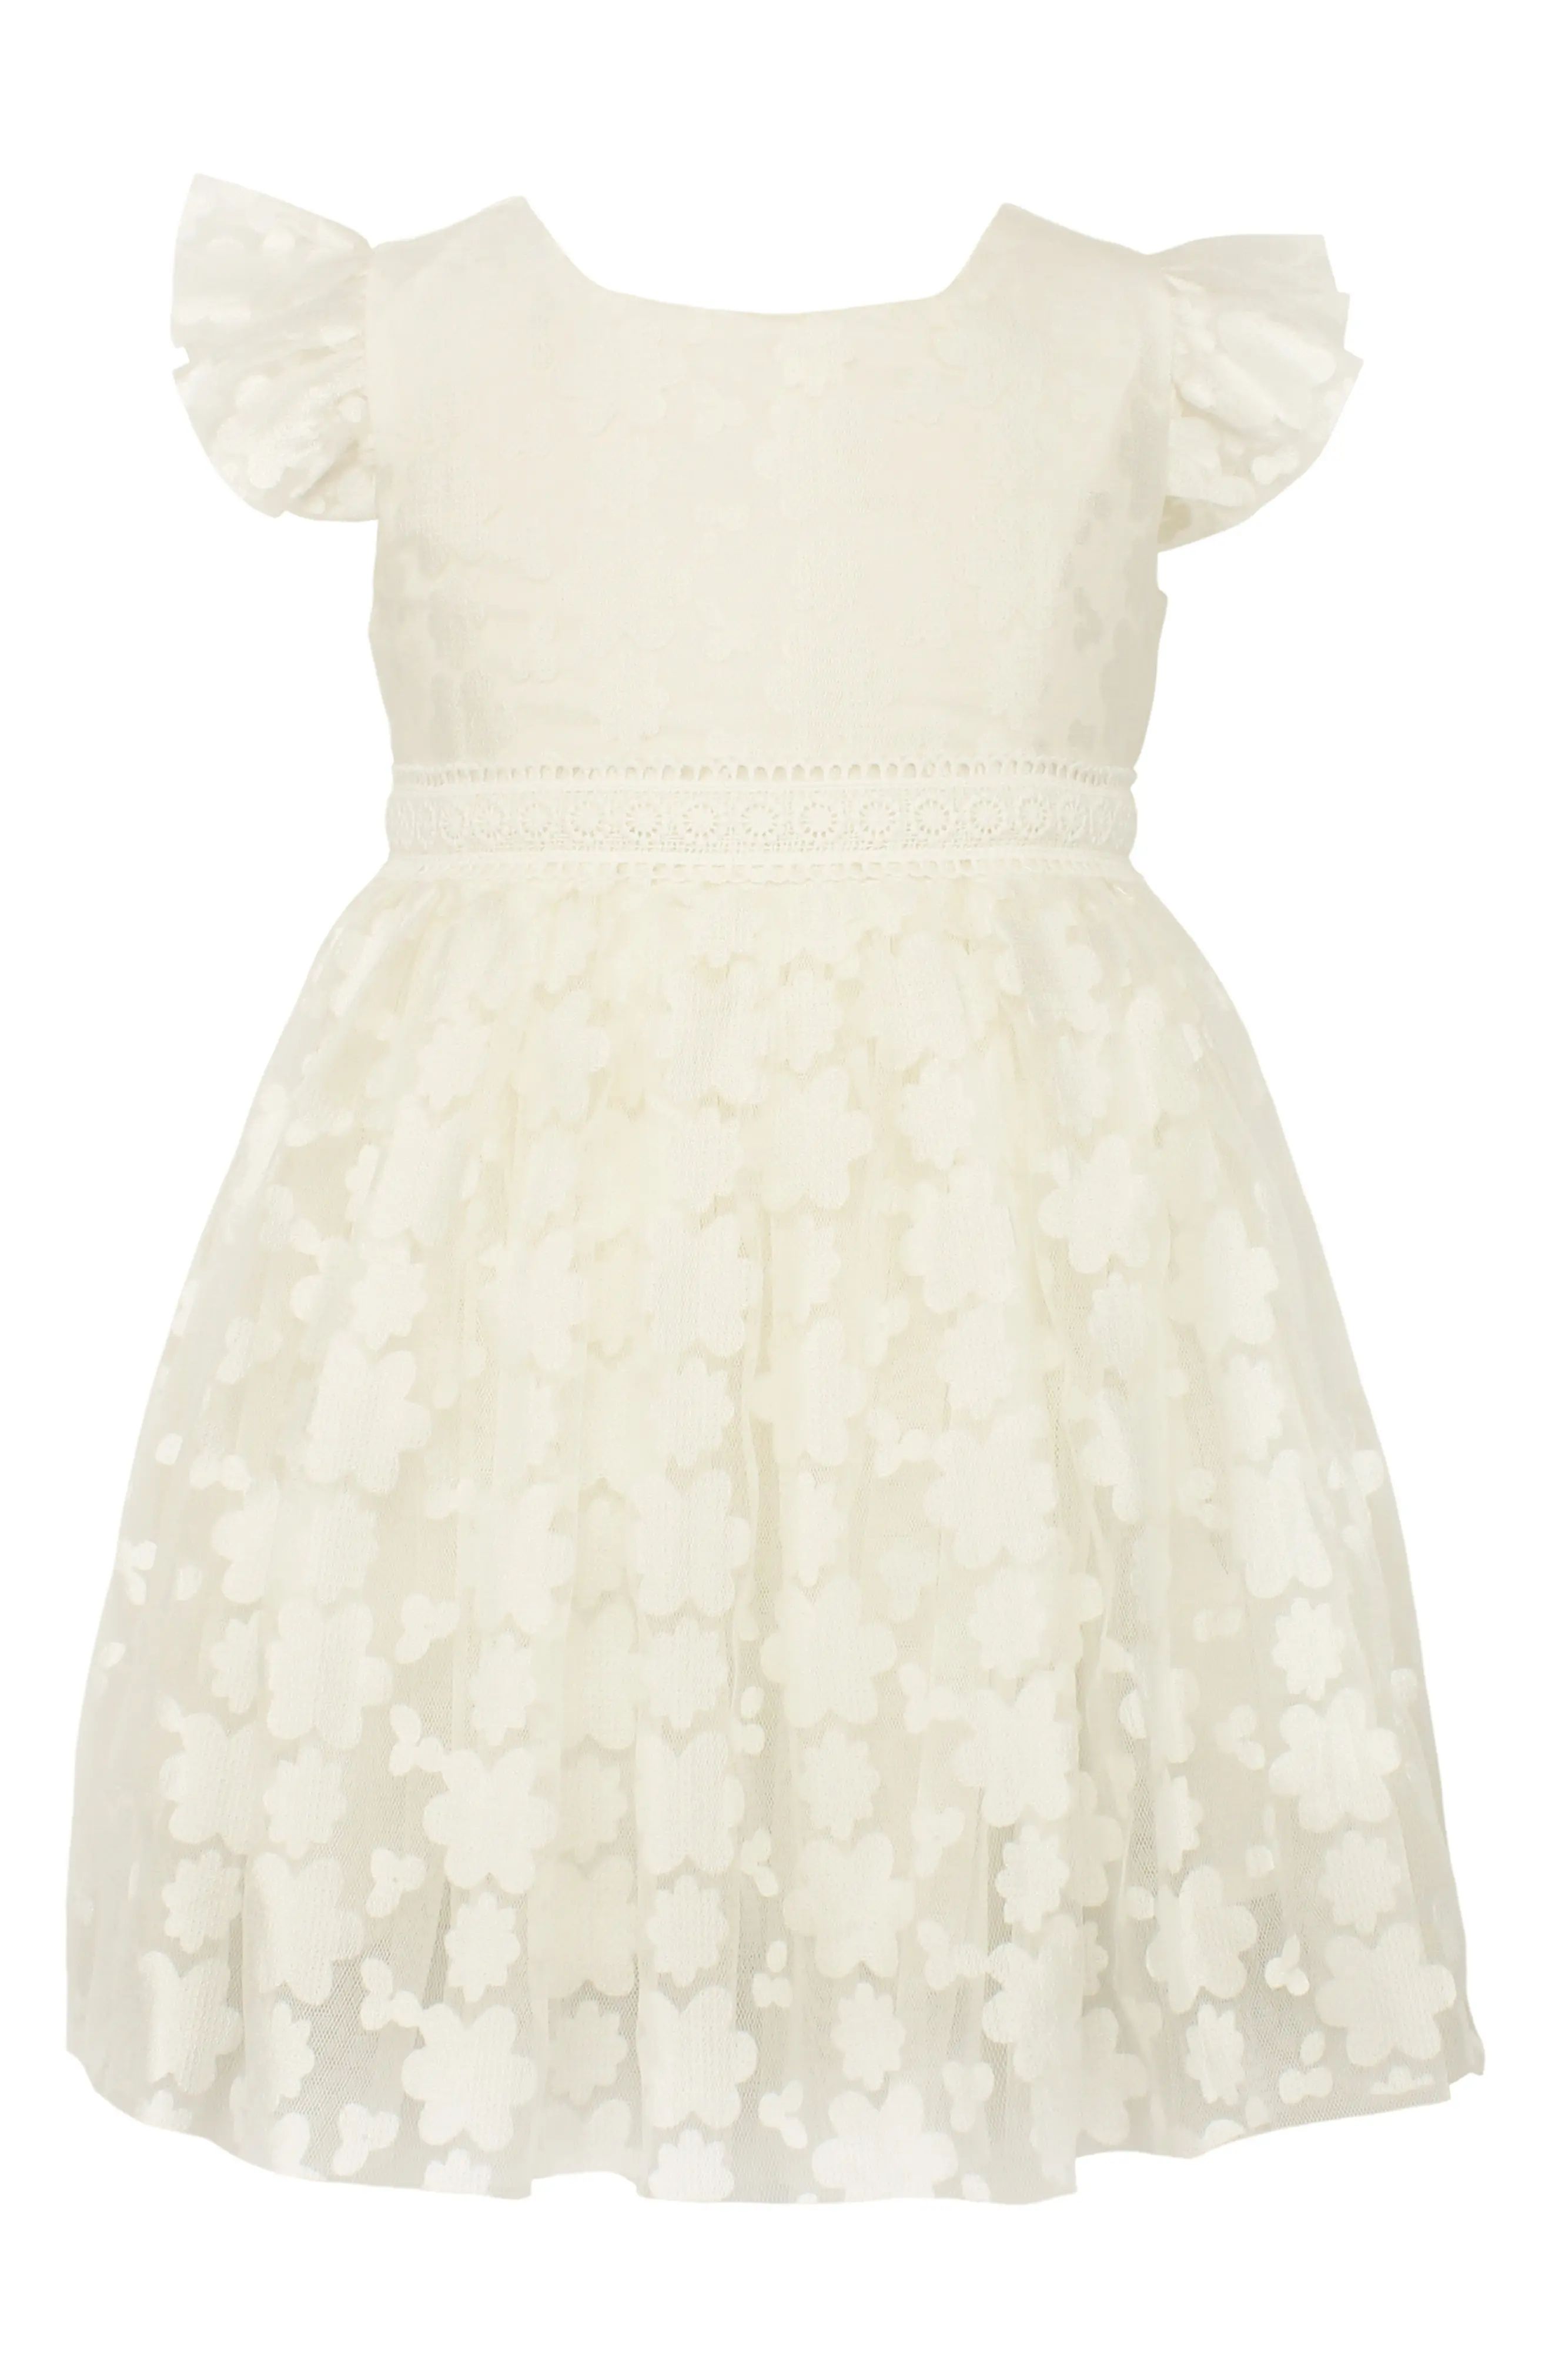 Popatu Floral Tulle Dress in White at Nordstrom, Size 12M | Nordstrom